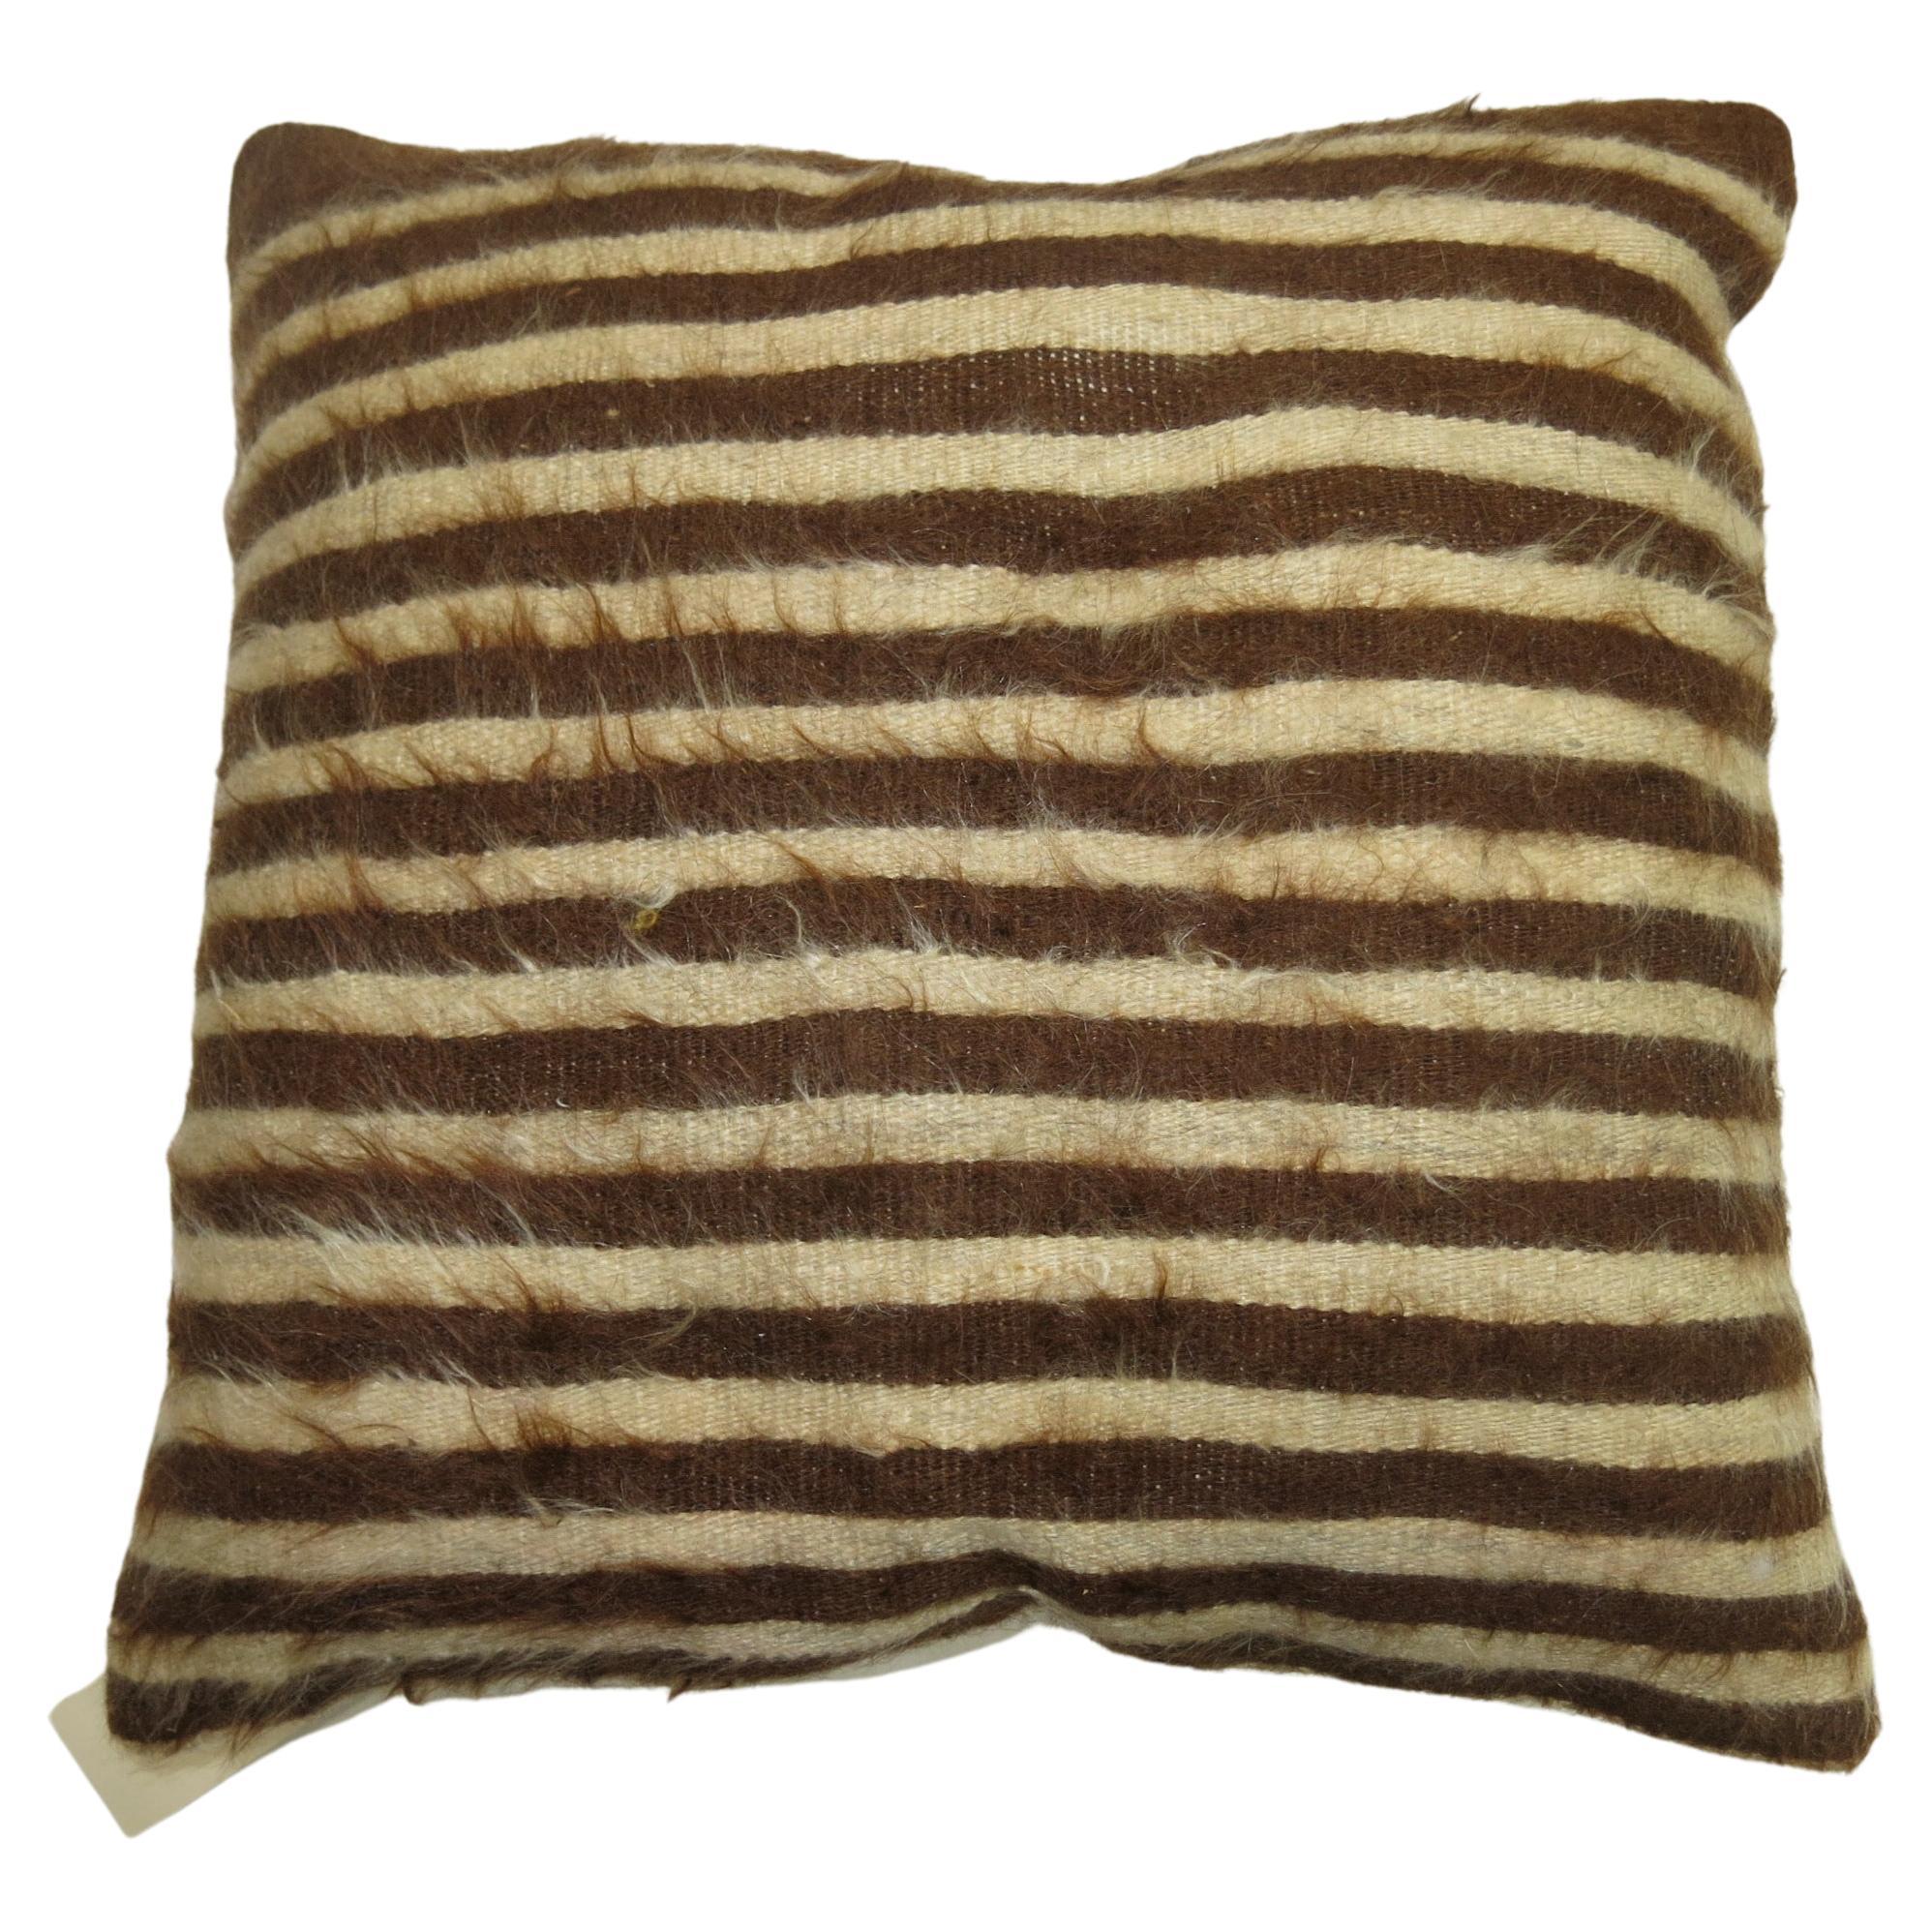 A square size pillow made from a Turkish Mohair rug.

19'' x 19''.

